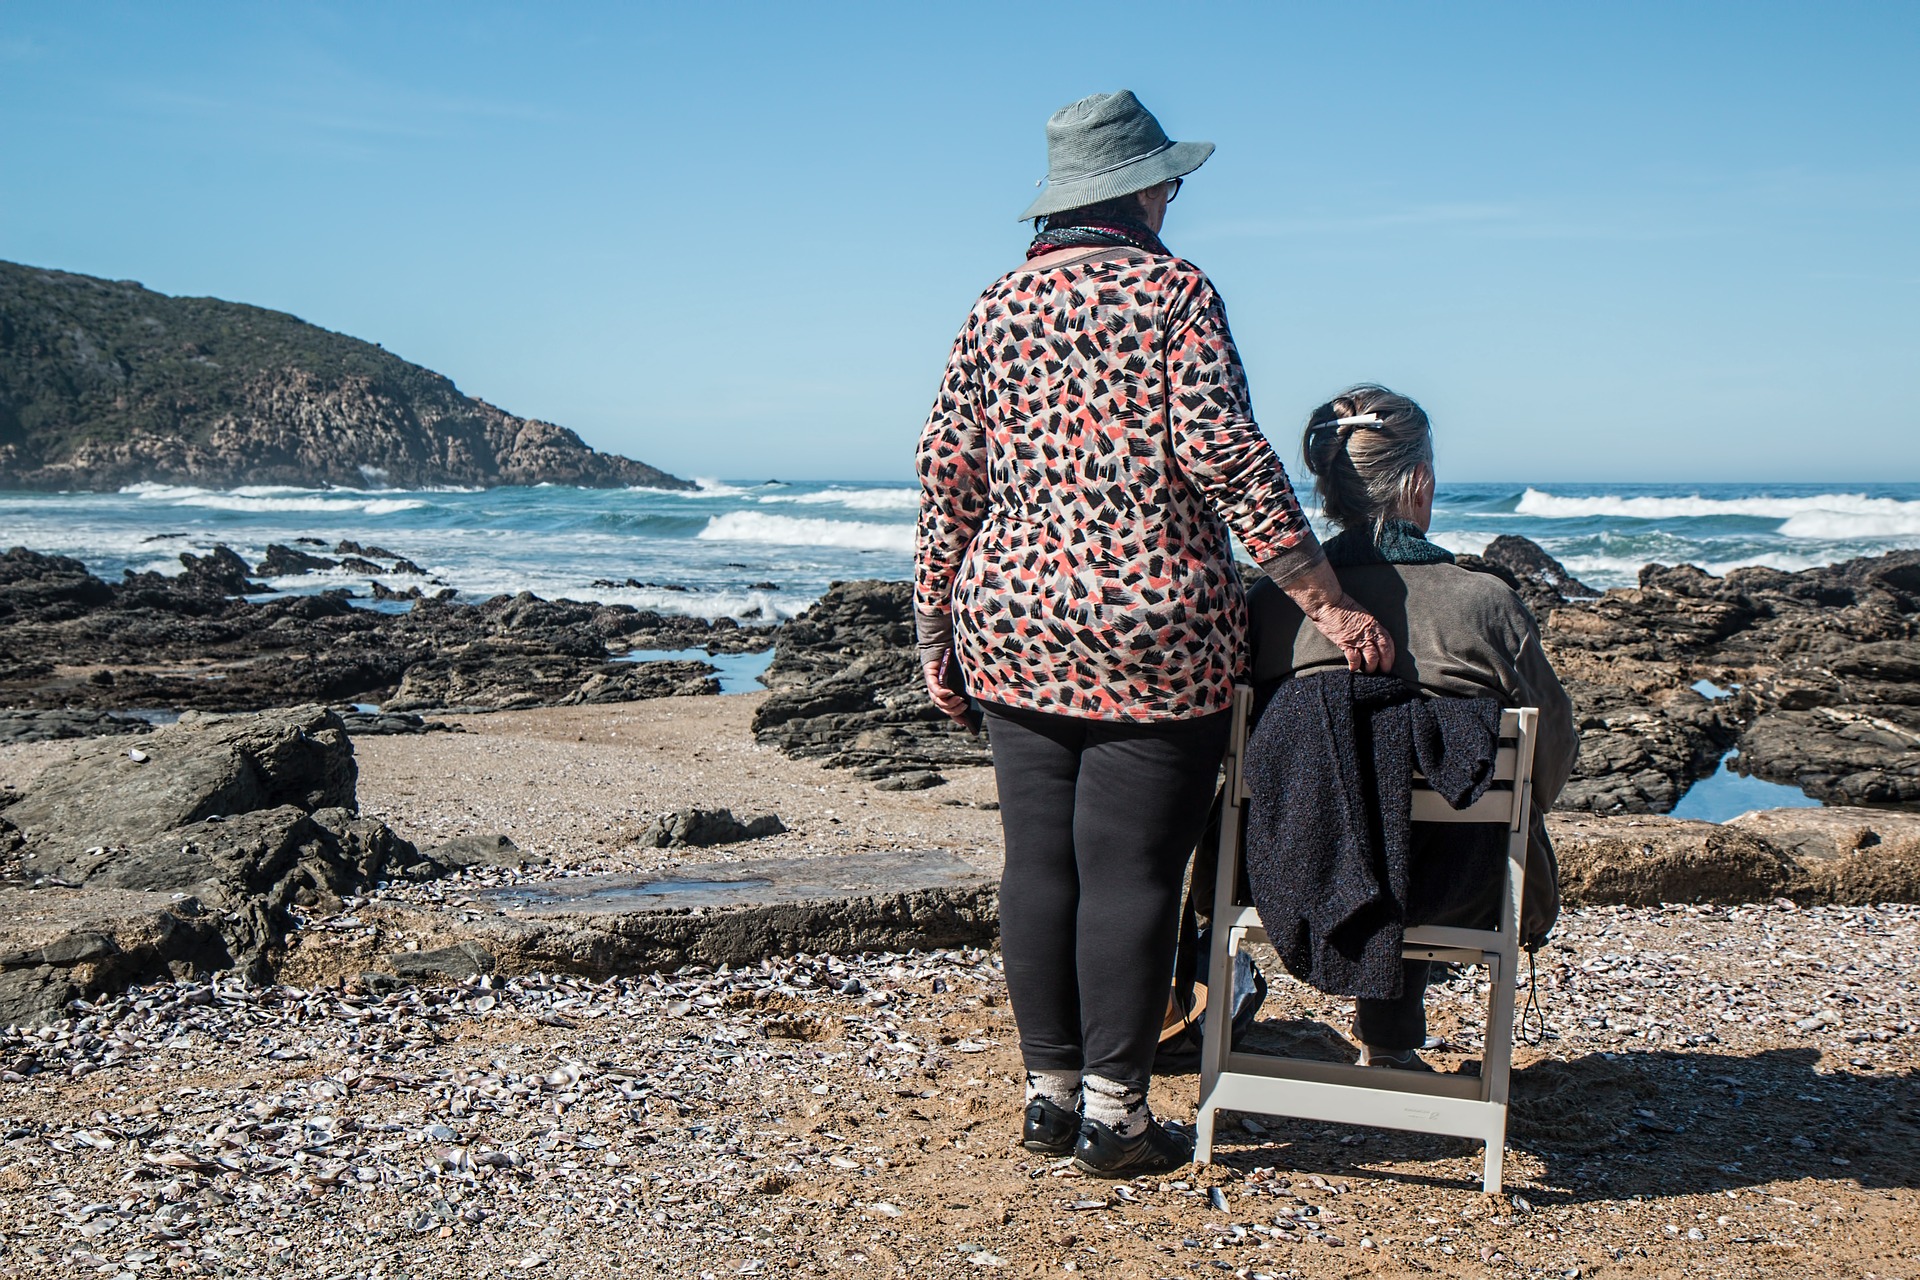 Two old ladies on a beach looking out to sea, one is sitting down, the other who is wearing a hat, is standing by her side